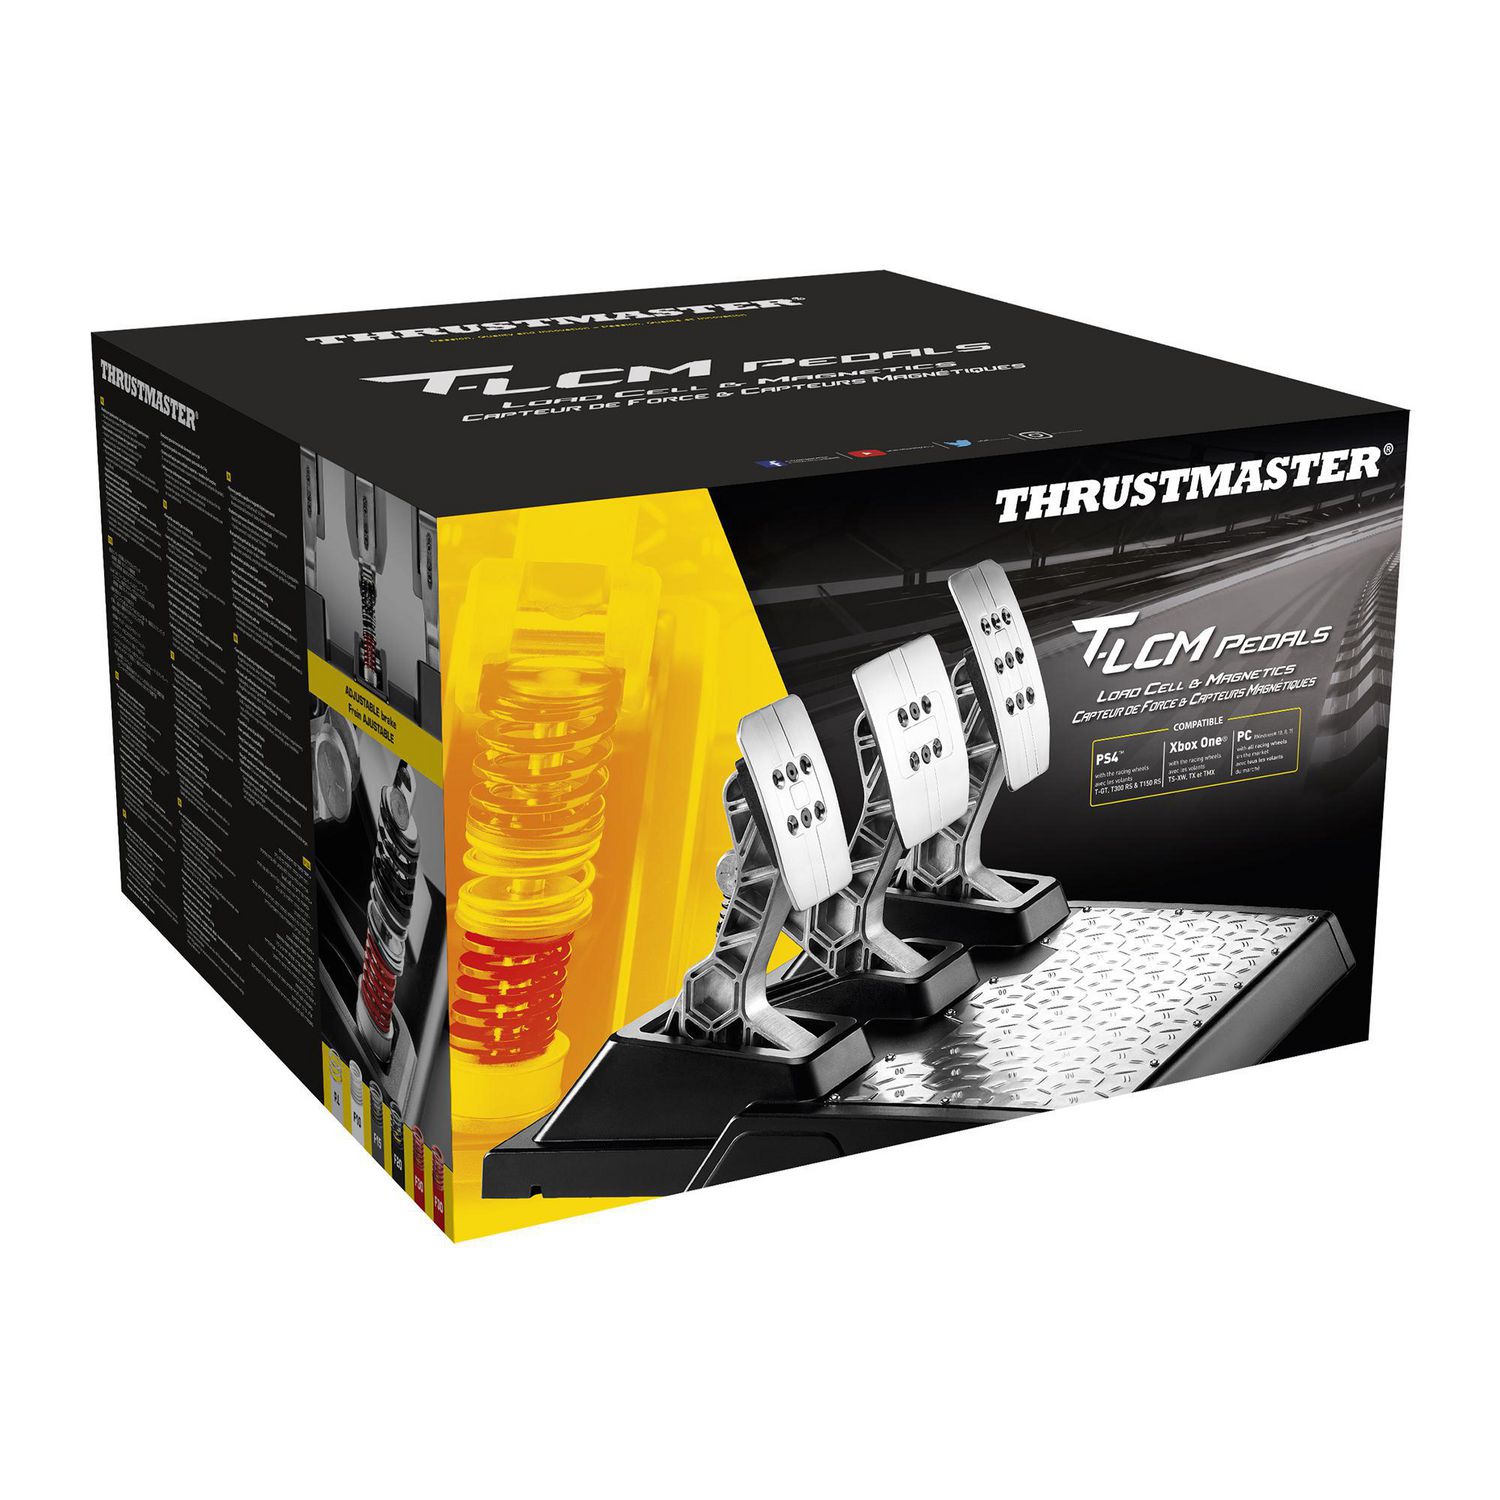 Thrustmaster : T-LCM Pedals — Magnetic and Load Cell pedal set for 